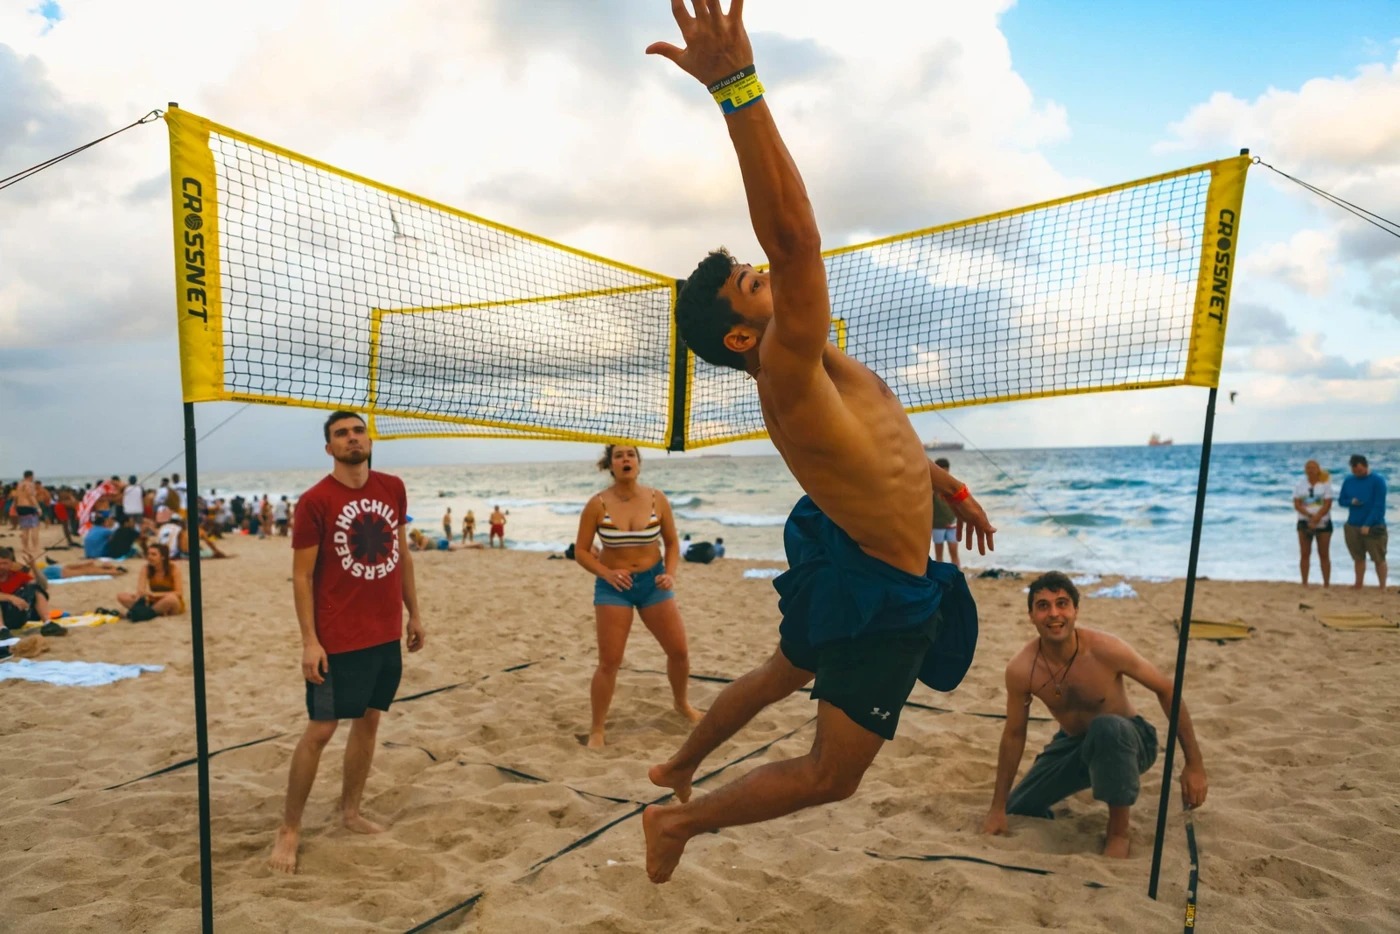 Cross Volleyball Net, Set up within minutes in sand, grass, or indoors